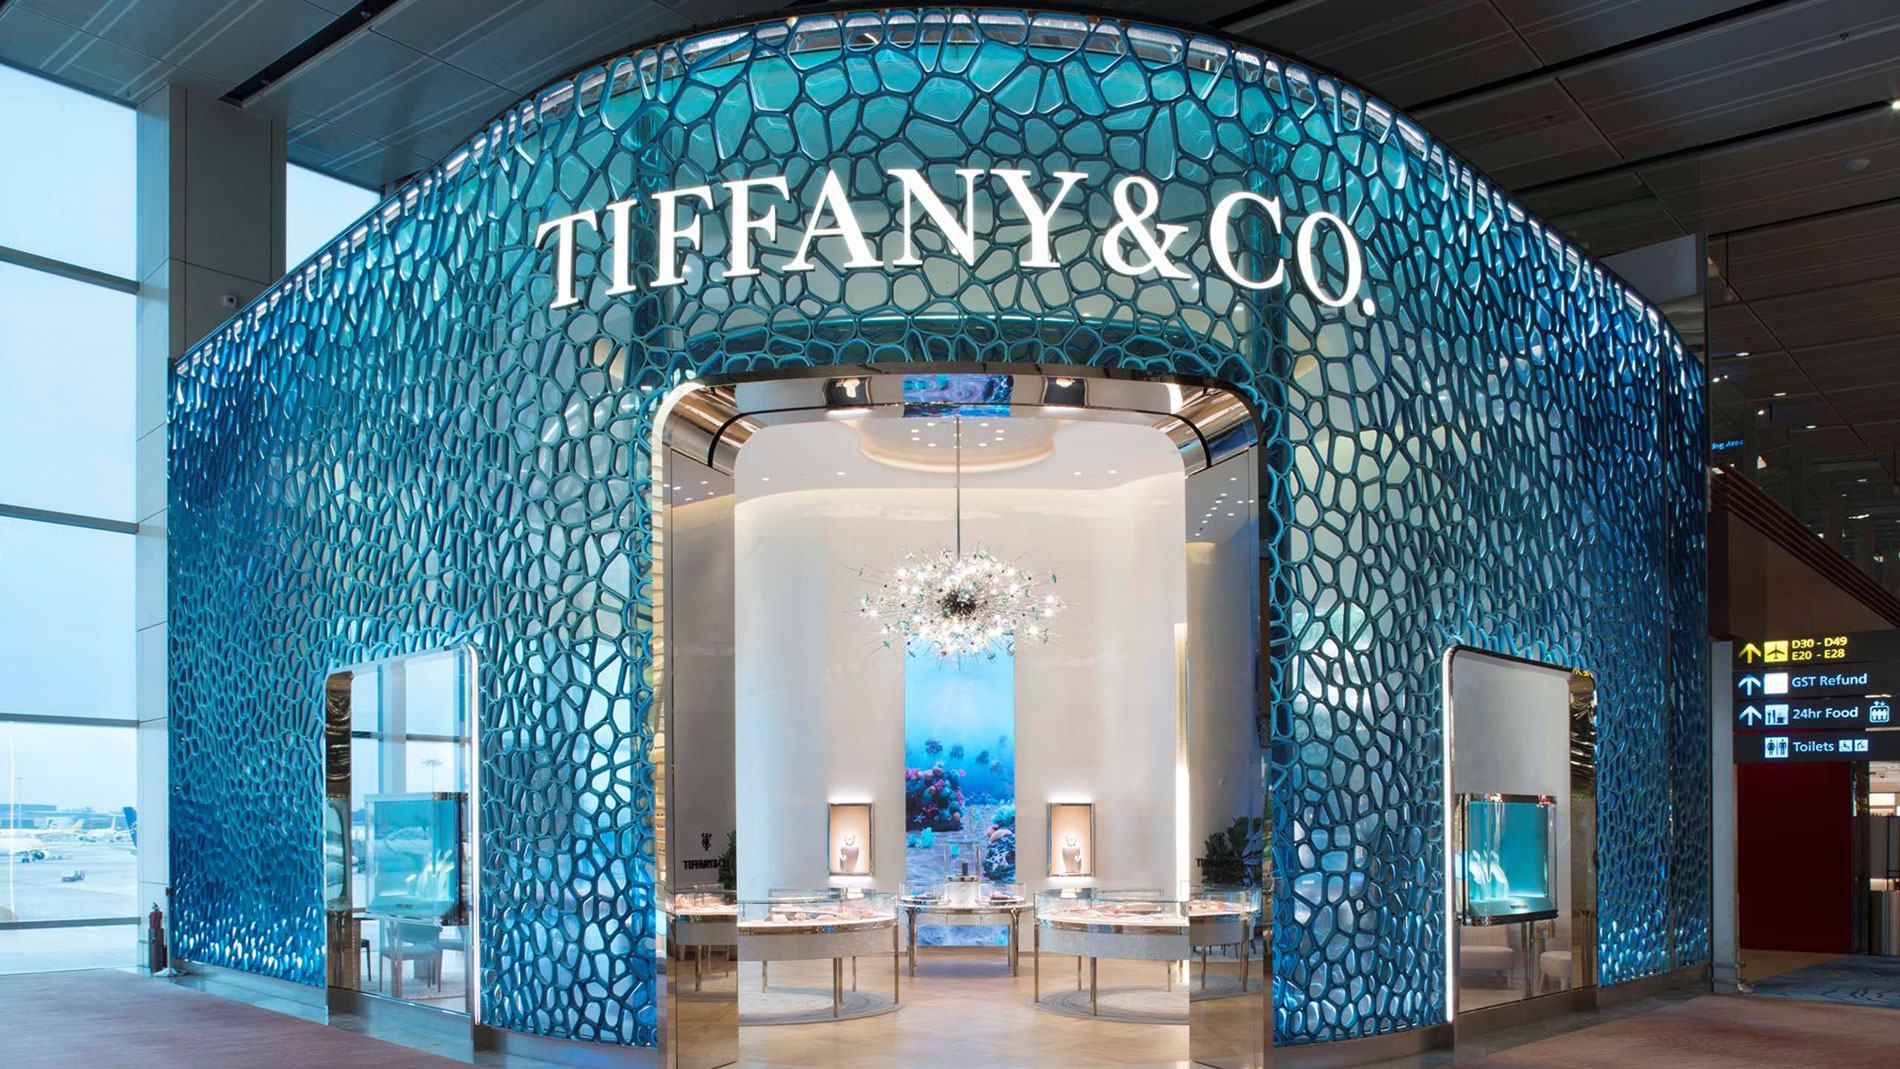 Extraordinary 3D-printed interior solutions: Tiffany & Co store at Singapore airport and Dior Gallery in Paris. Images: Tiffany, Dior / Kristen Pelou